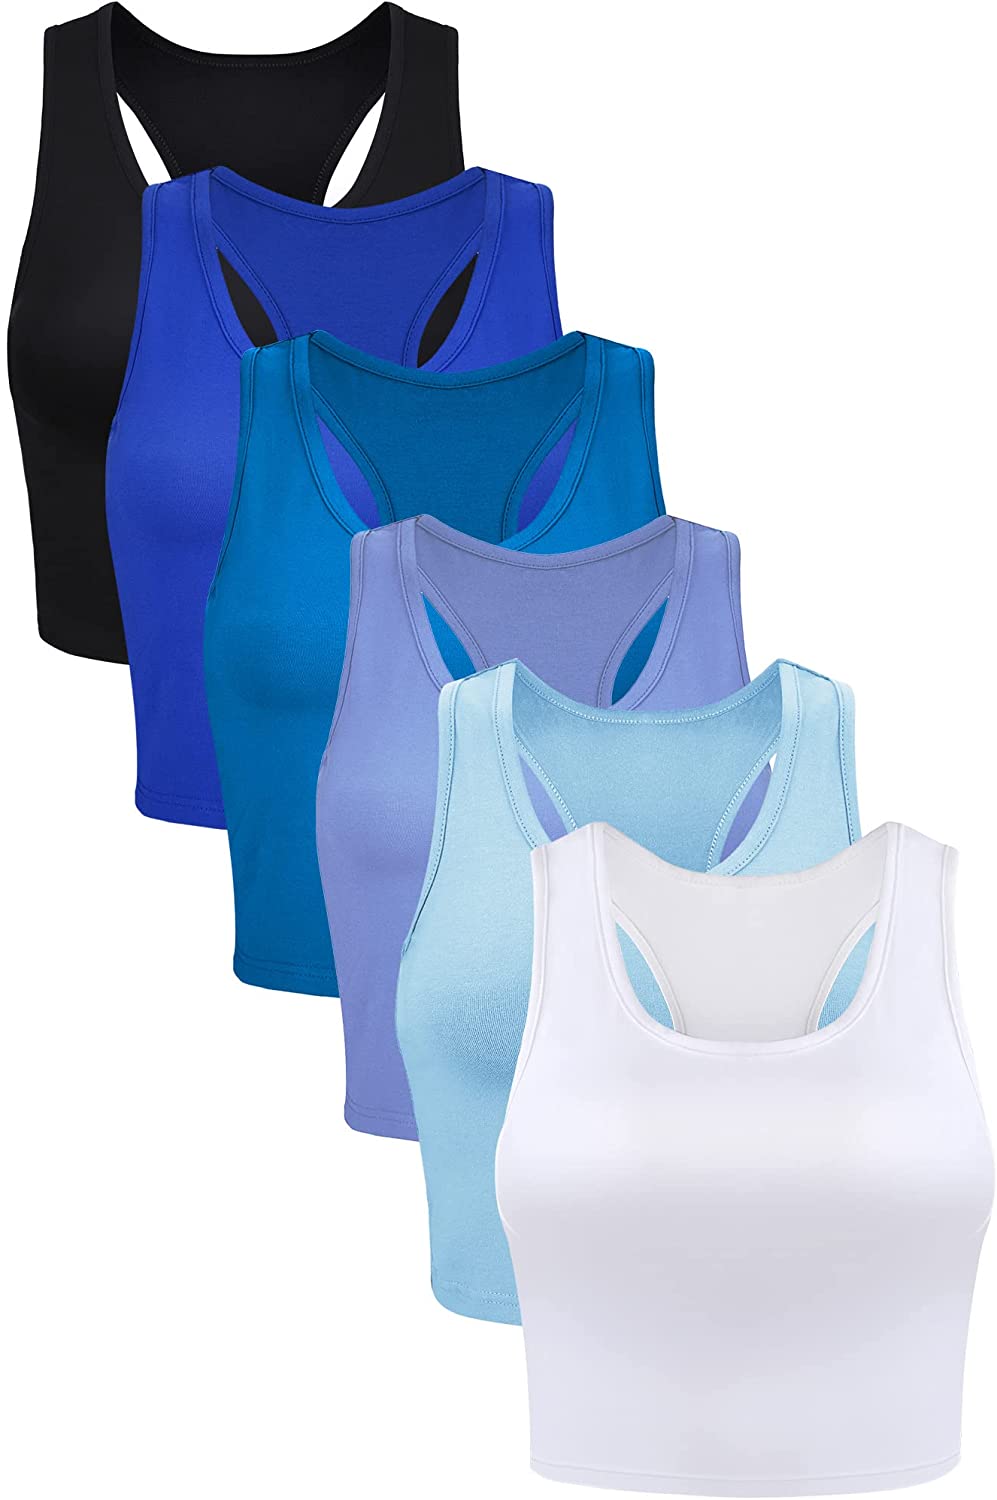 6 Pieces Basic Sleeveless Racerback Sports Crop Tank Tops for Women Girls Daily Wearing